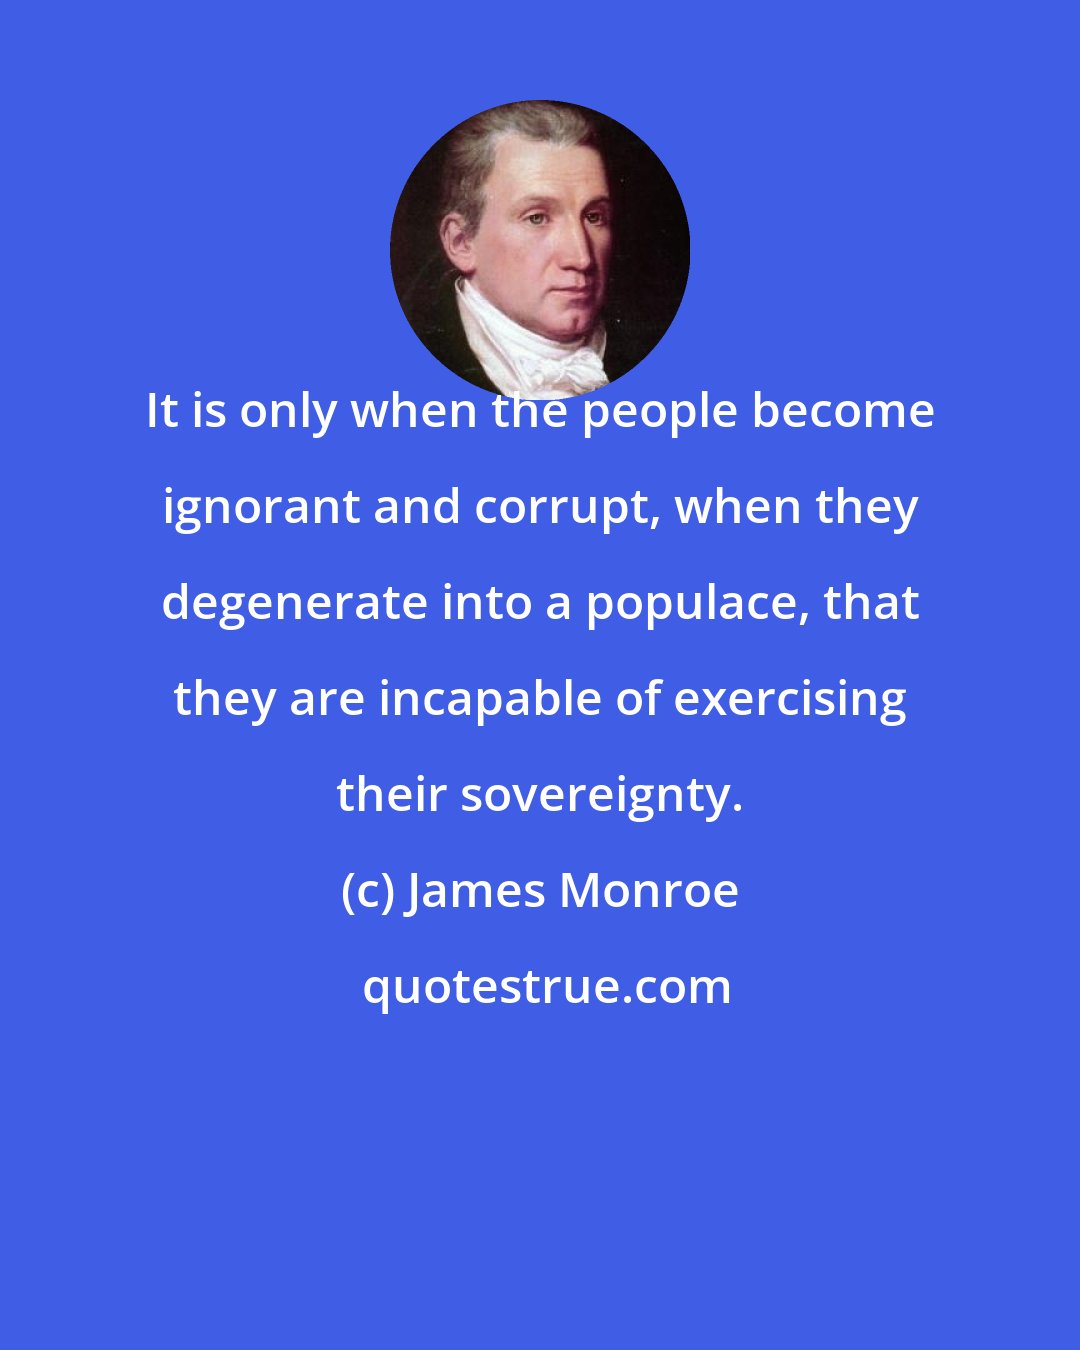 James Monroe: It is only when the people become ignorant and corrupt, when they degenerate into a populace, that they are incapable of exercising their sovereignty.